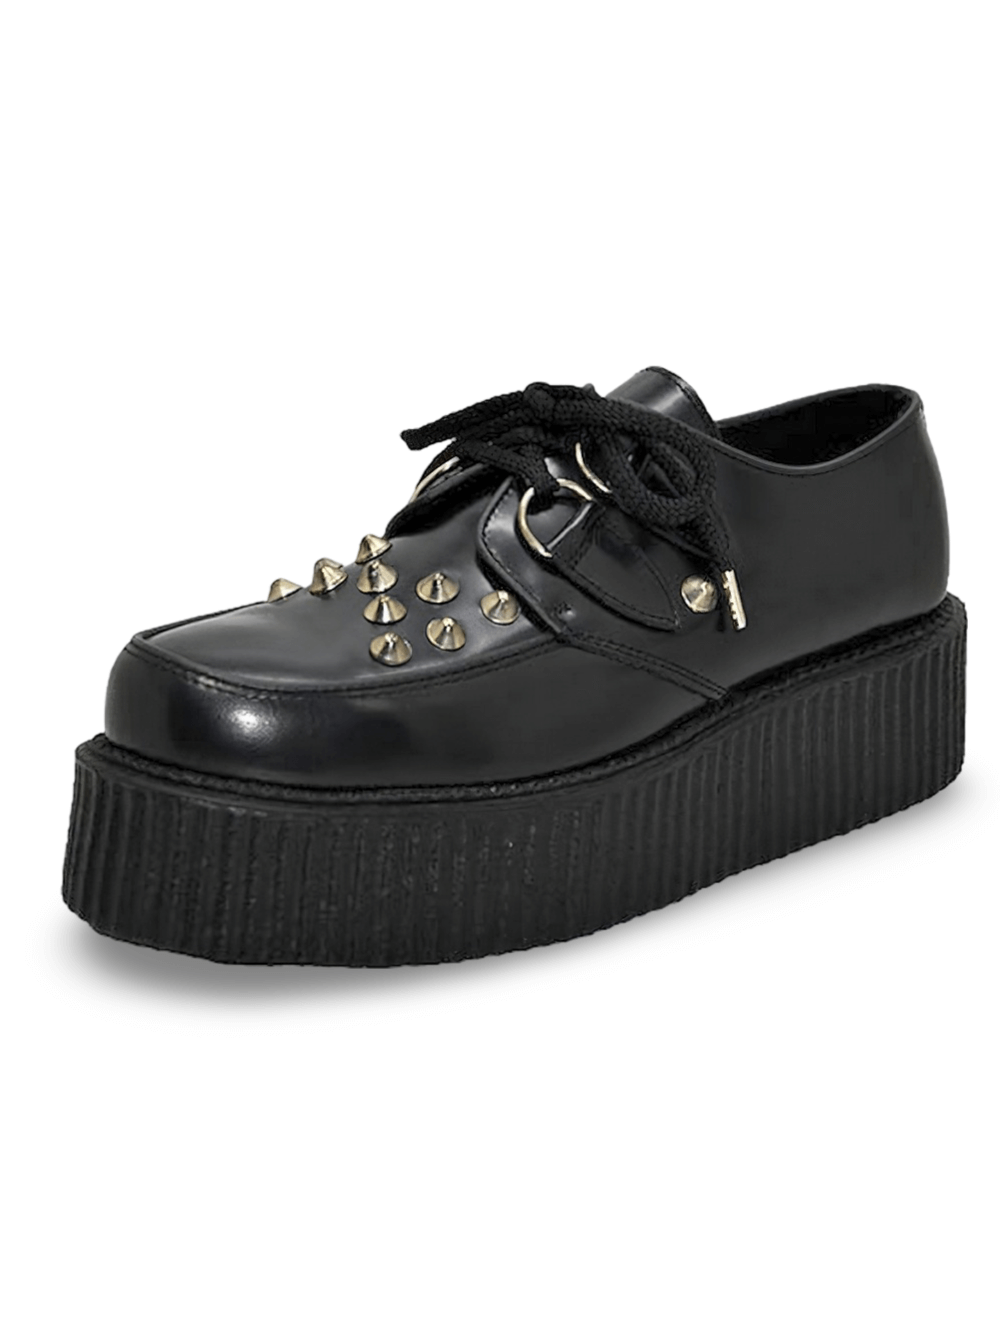 Studded Black Creepers with Double Sole and Lace-Up